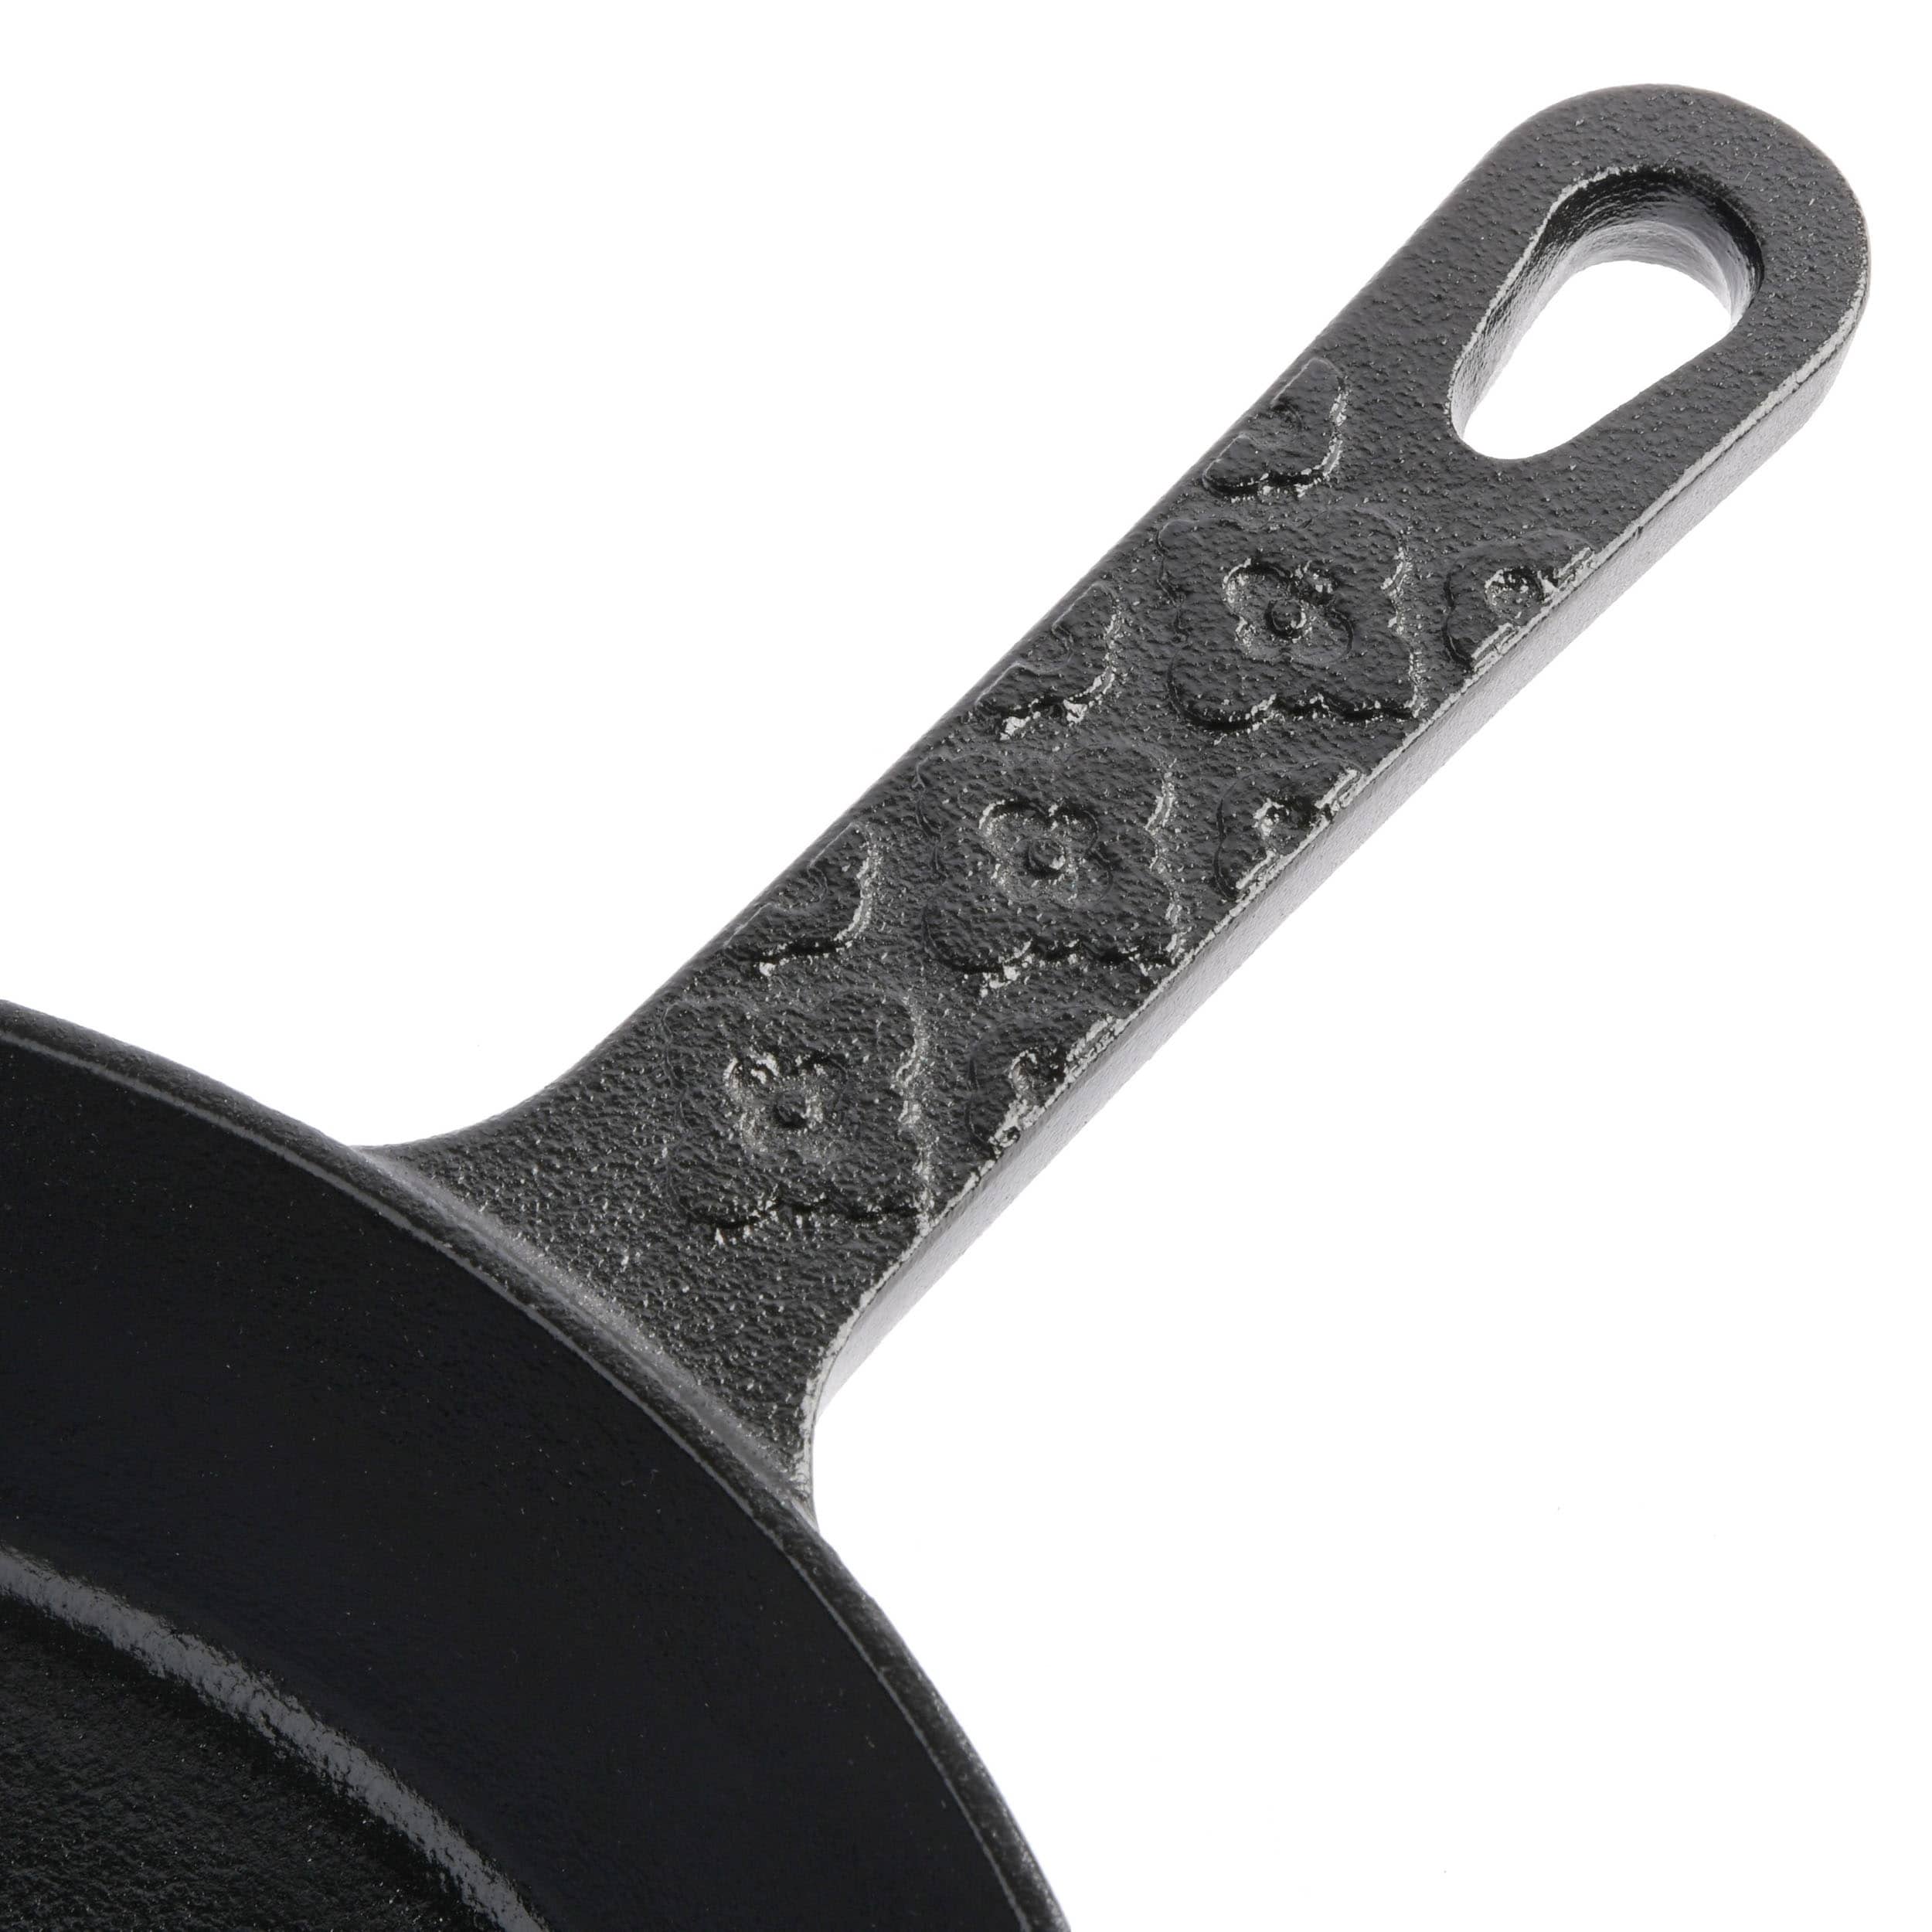 Spice by Tia Mowry Savory Saffron Preseasoned 10 In Cast Iron Skillet - On  Sale - Bed Bath & Beyond - 35976788